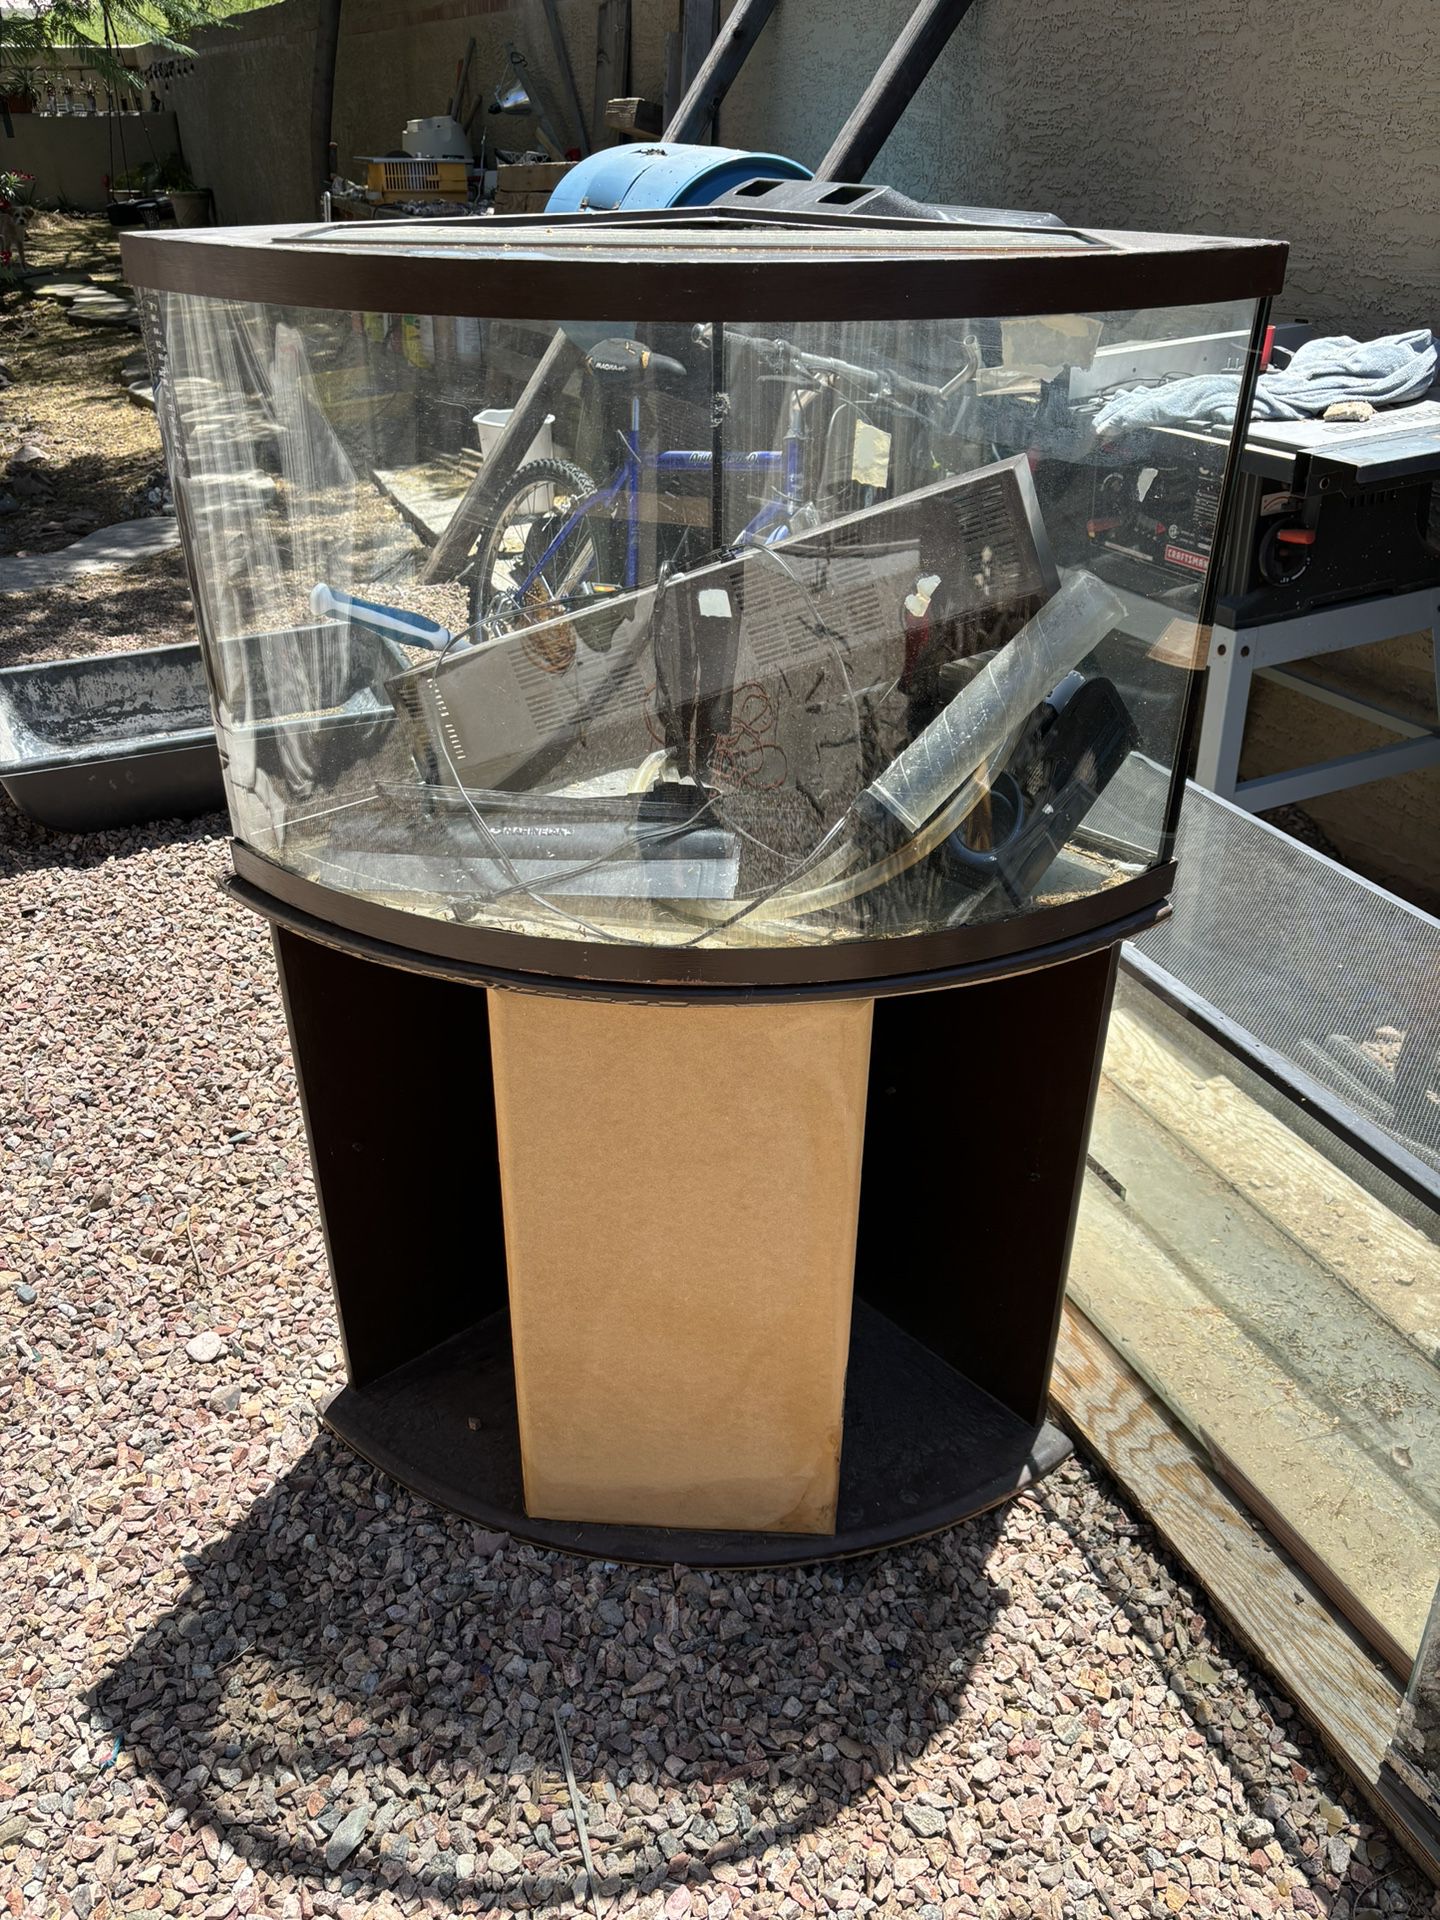 Large Bow Front Fish Tank With Stand- 2 Extra Tanks!